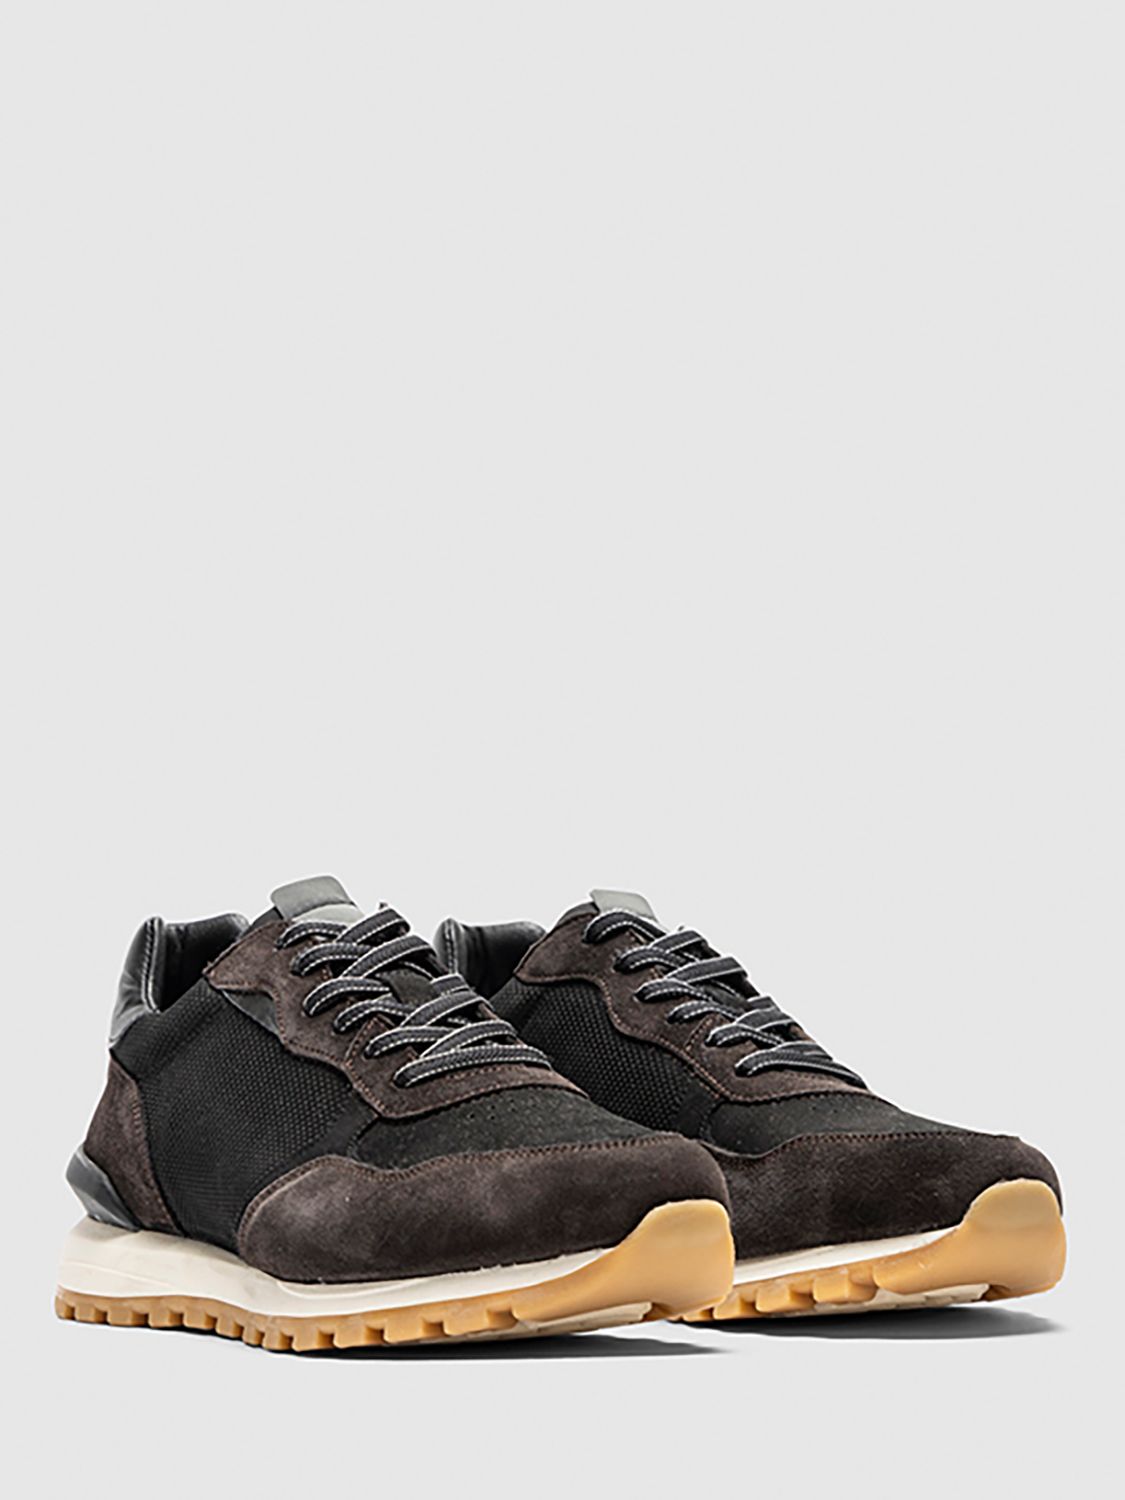 Buy Rodd & Gunn Queenstown Leather Suede Lace Up Trainers, Testa Di Moro Online at johnlewis.com